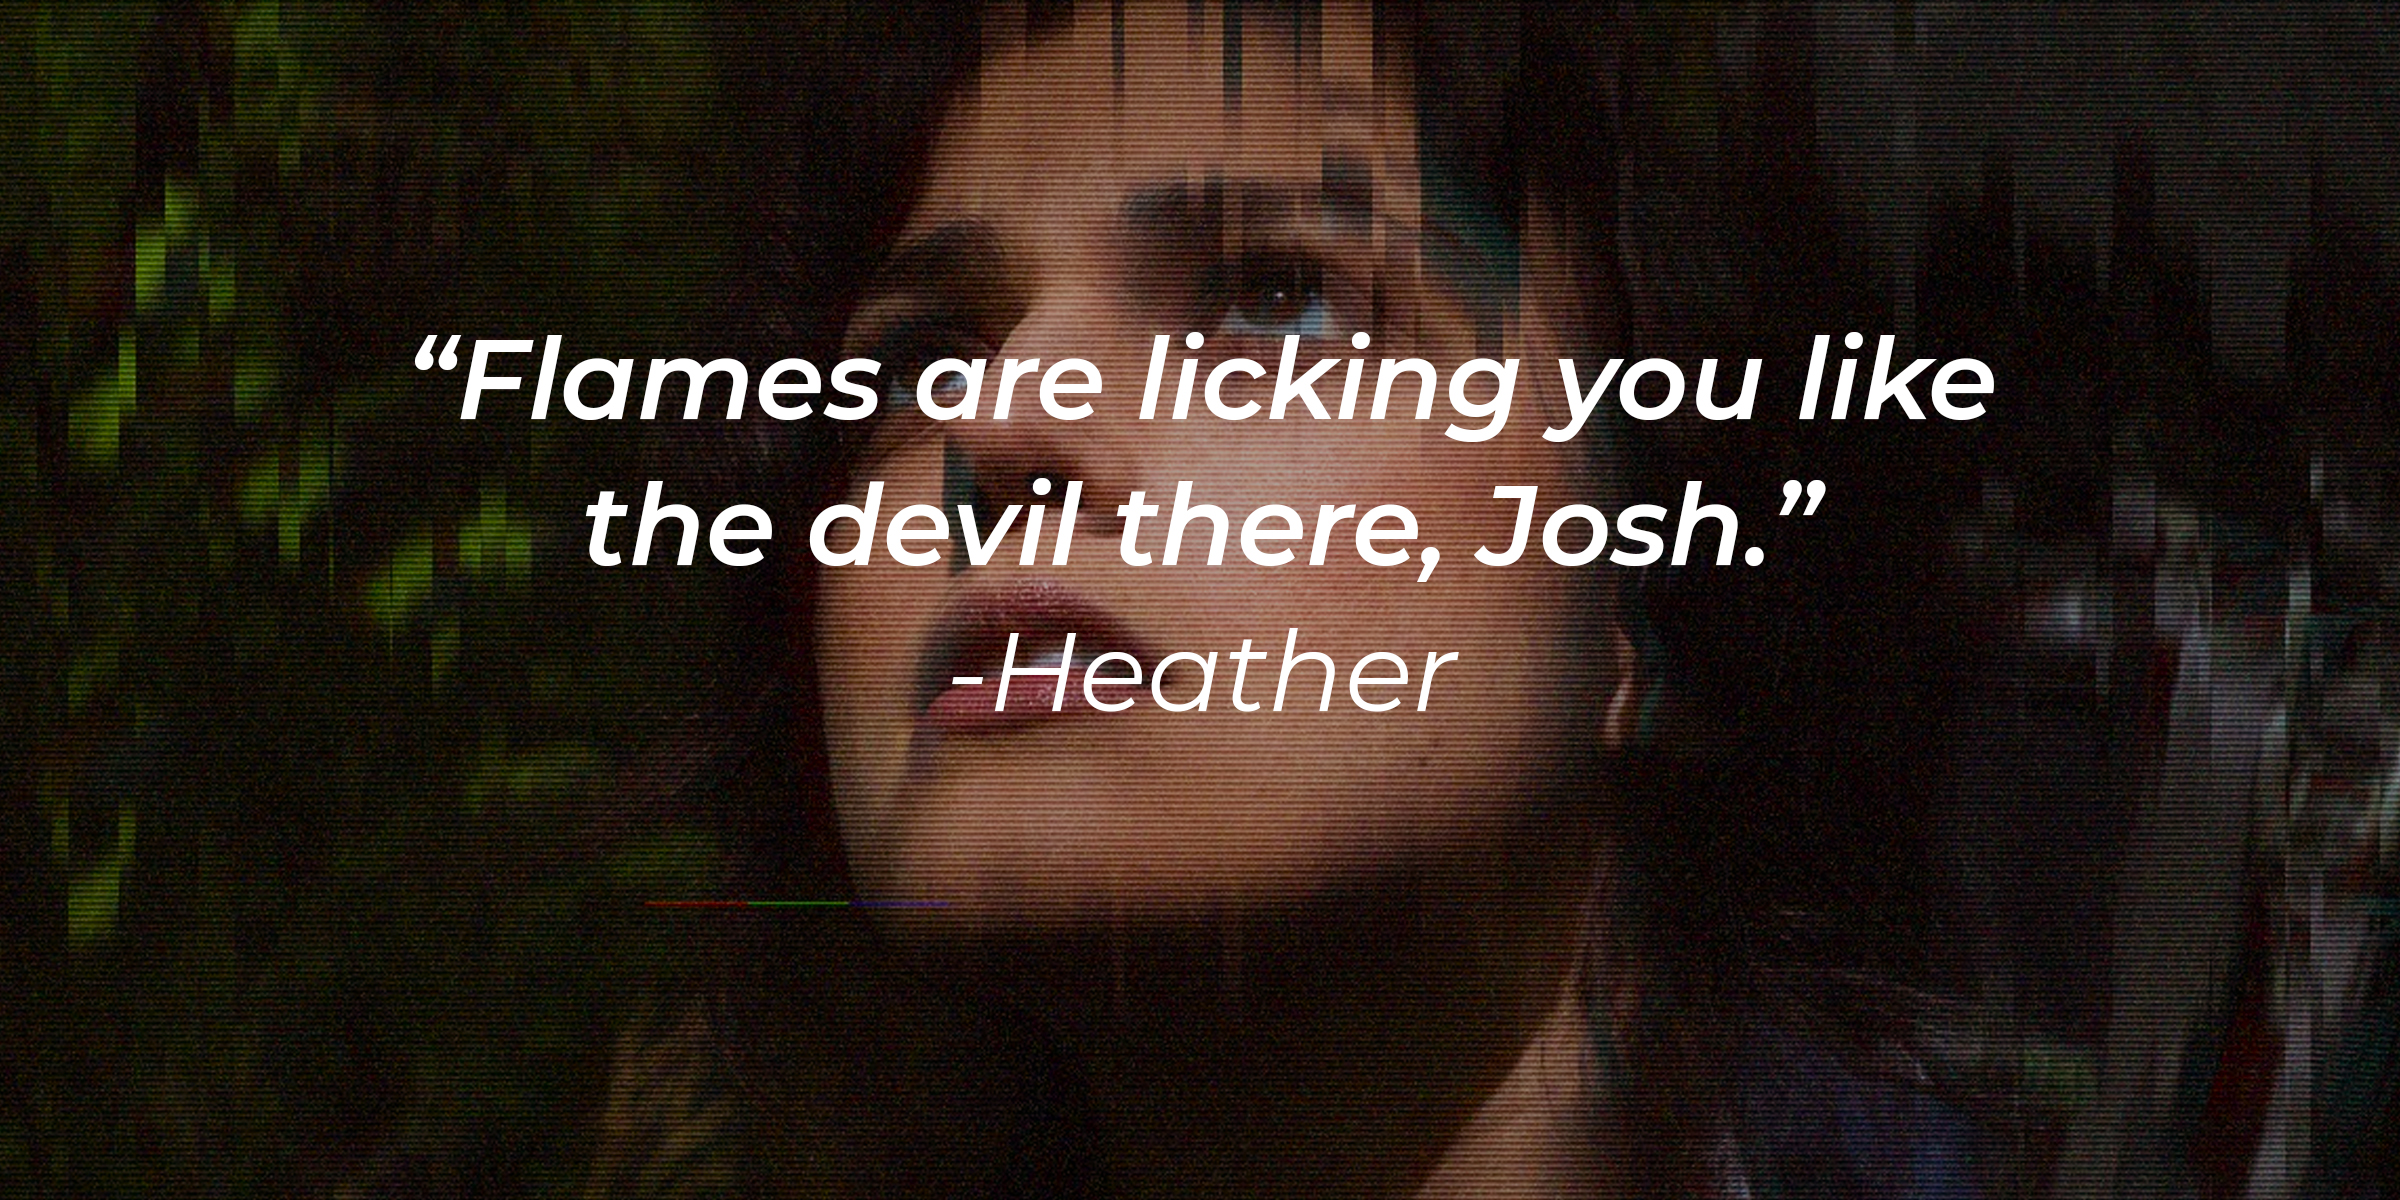 Heather's quote: “Flames are licking you like the devil there, Josh.” | Source: facebook.com/blairwitchmovie